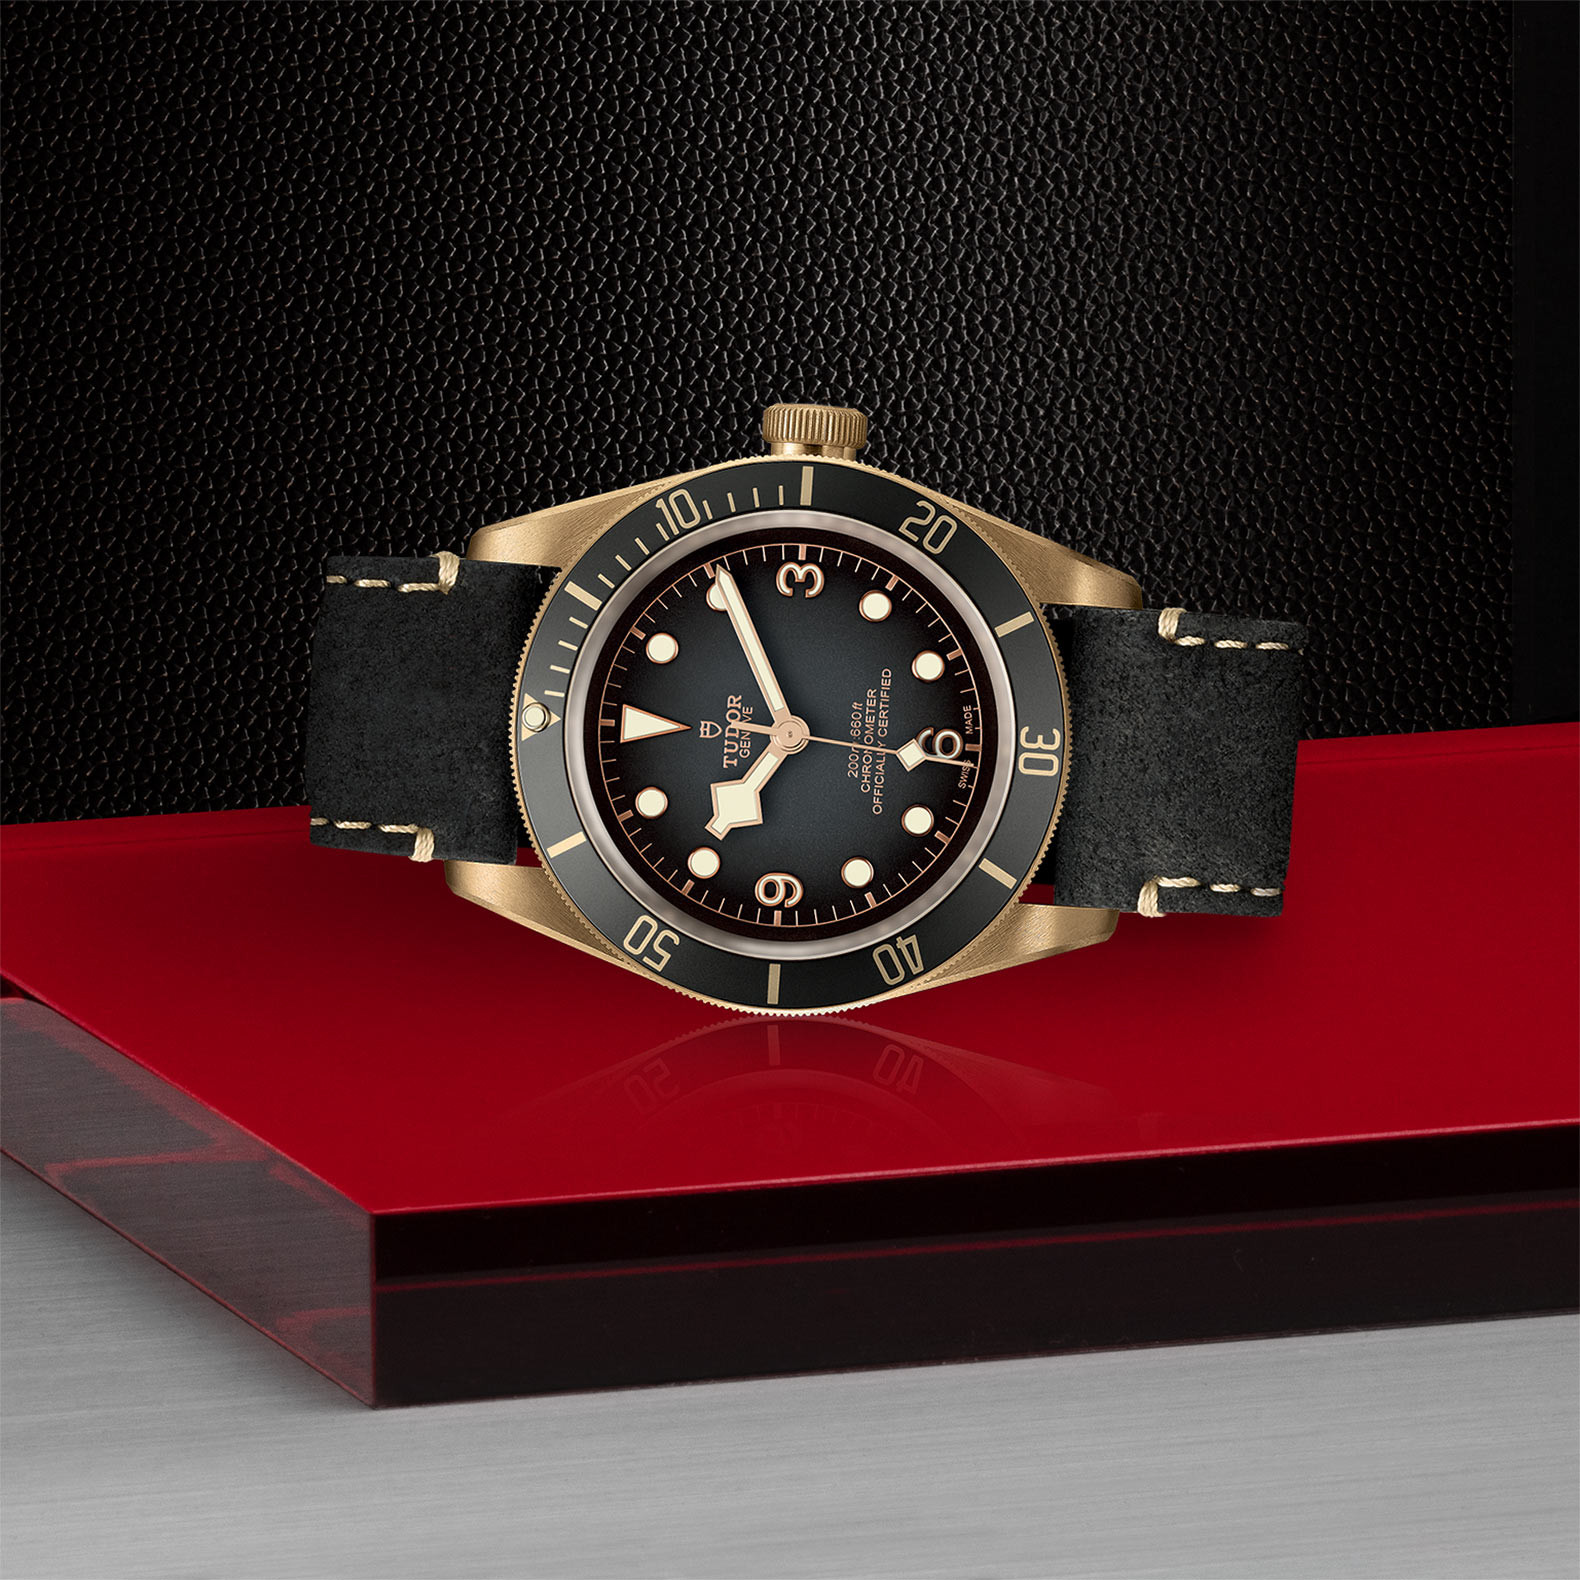 TUDOR Black Bay Bronze Watch in Store Laying Down